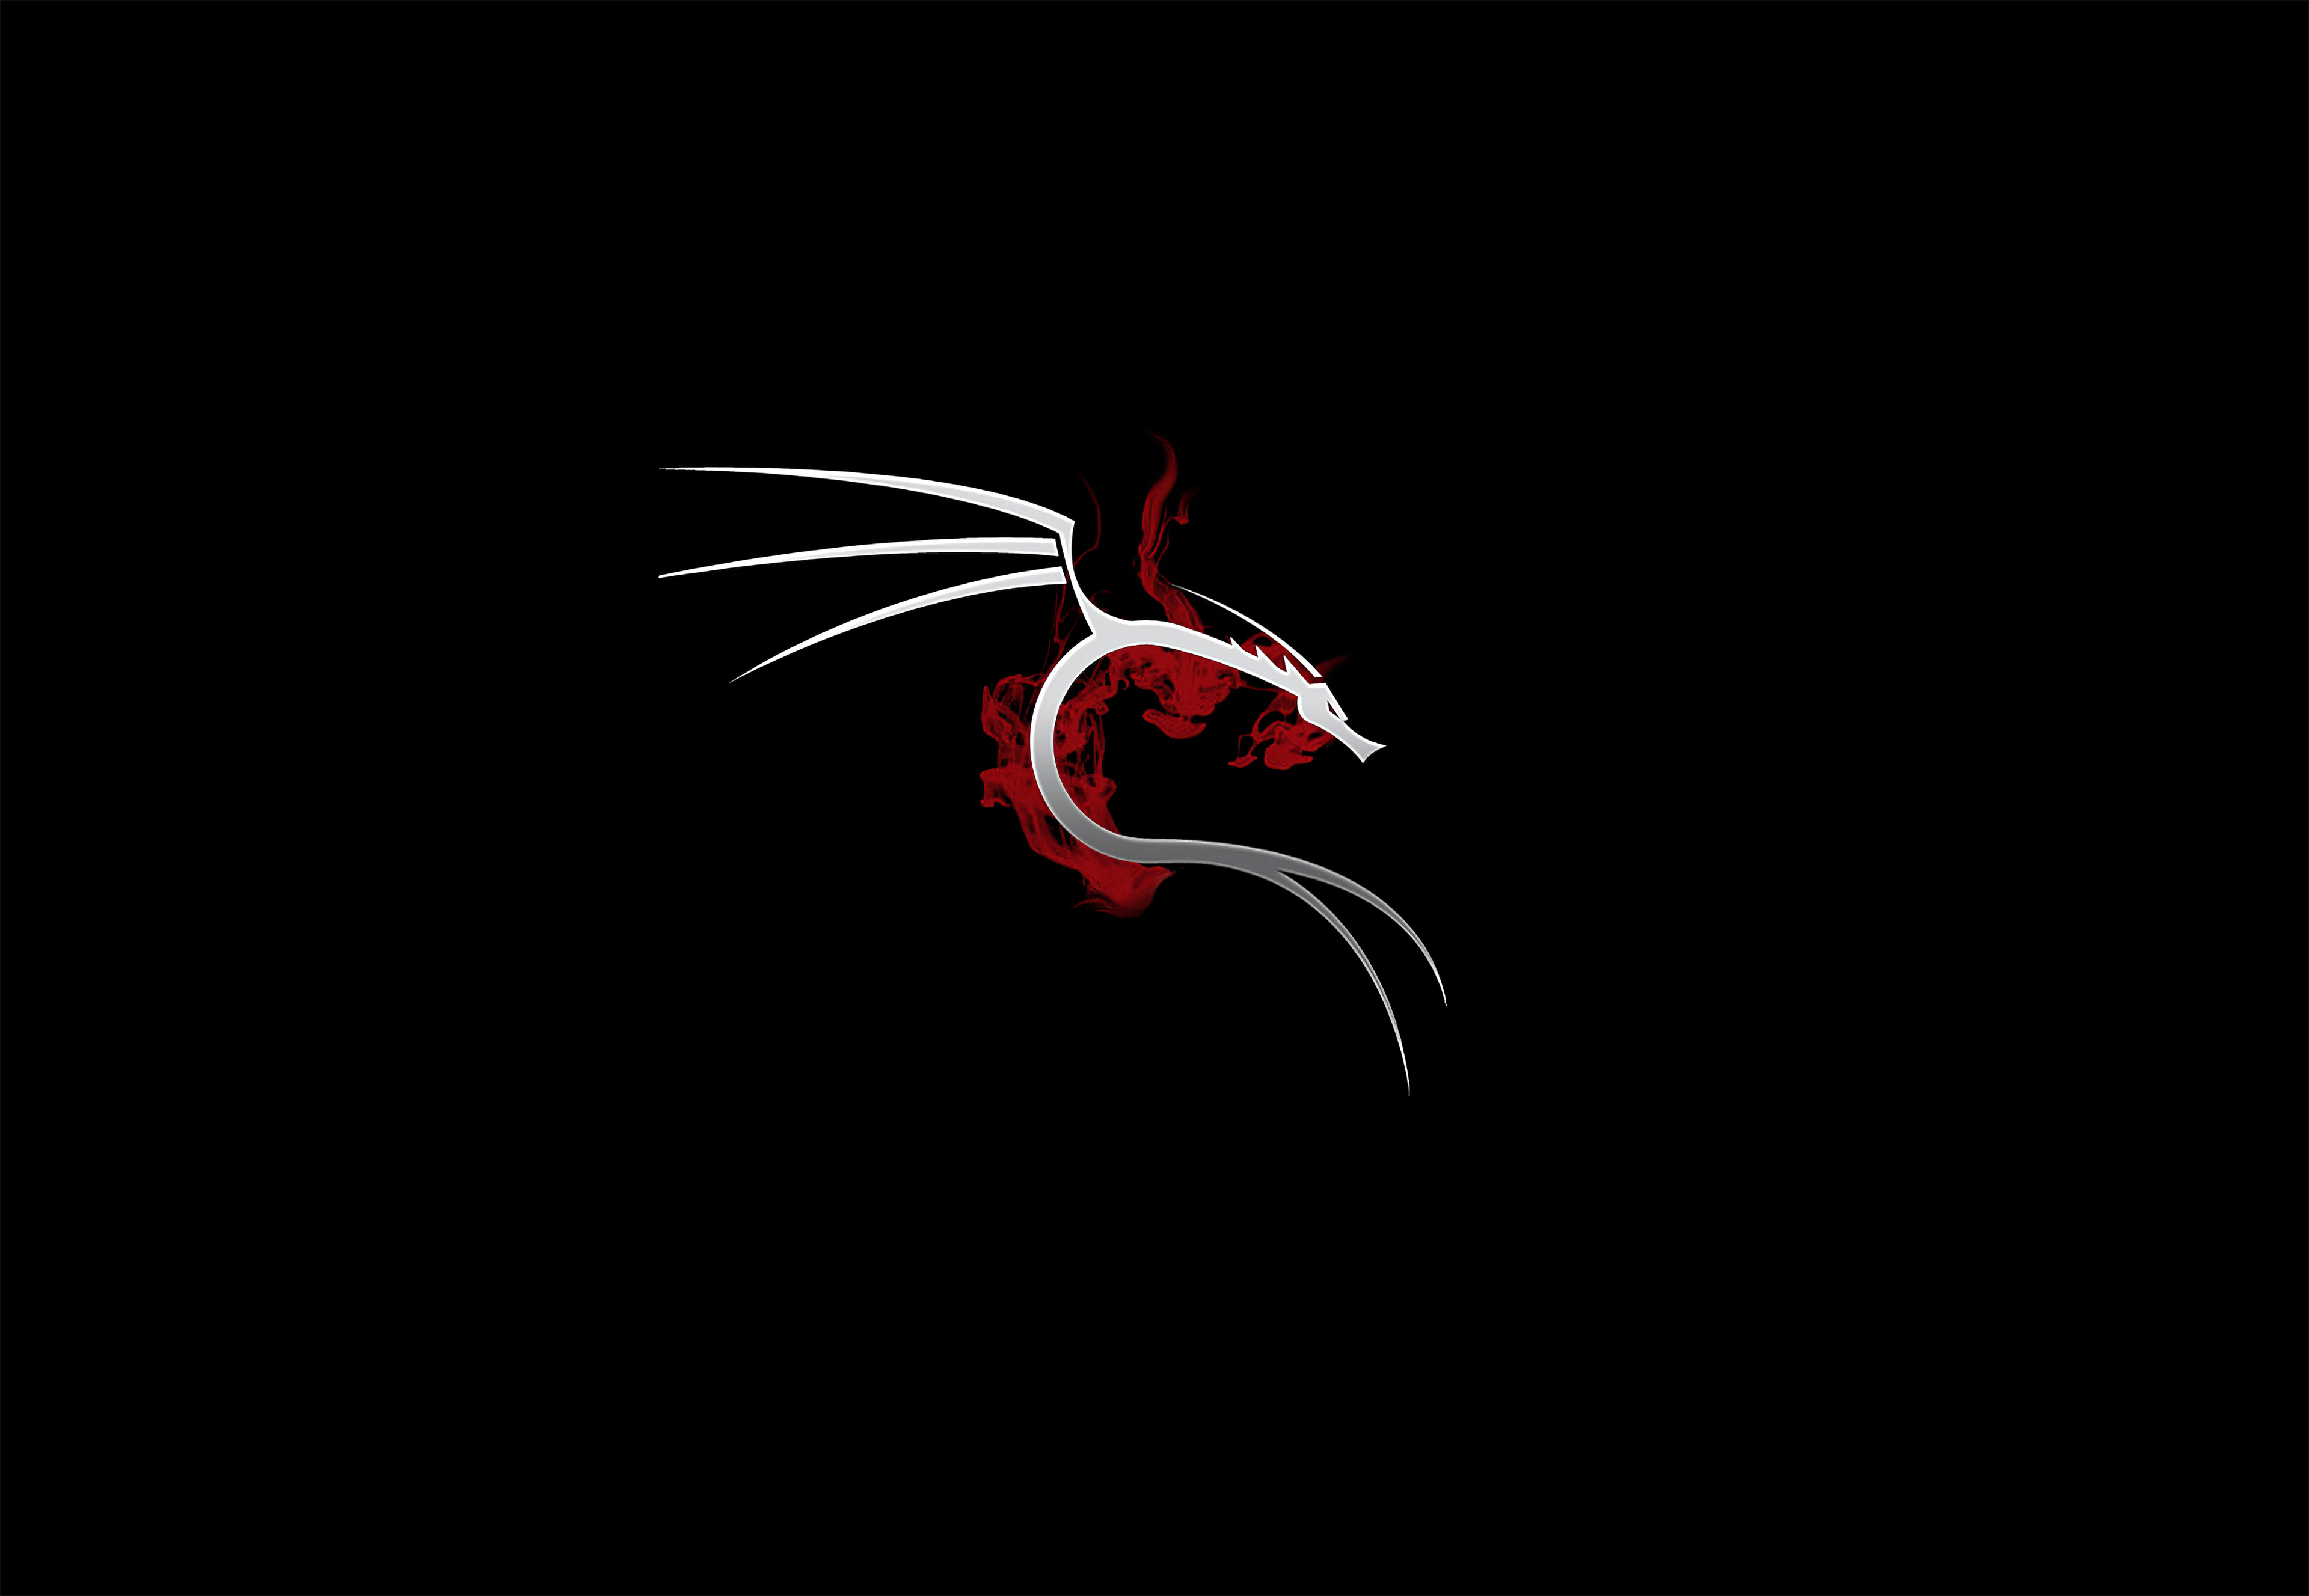 2932x2932 Kali Linux 4k Ipad Pro Retina Display Hd 4k Wallpapers Images Backgrounds Photos And Pictures